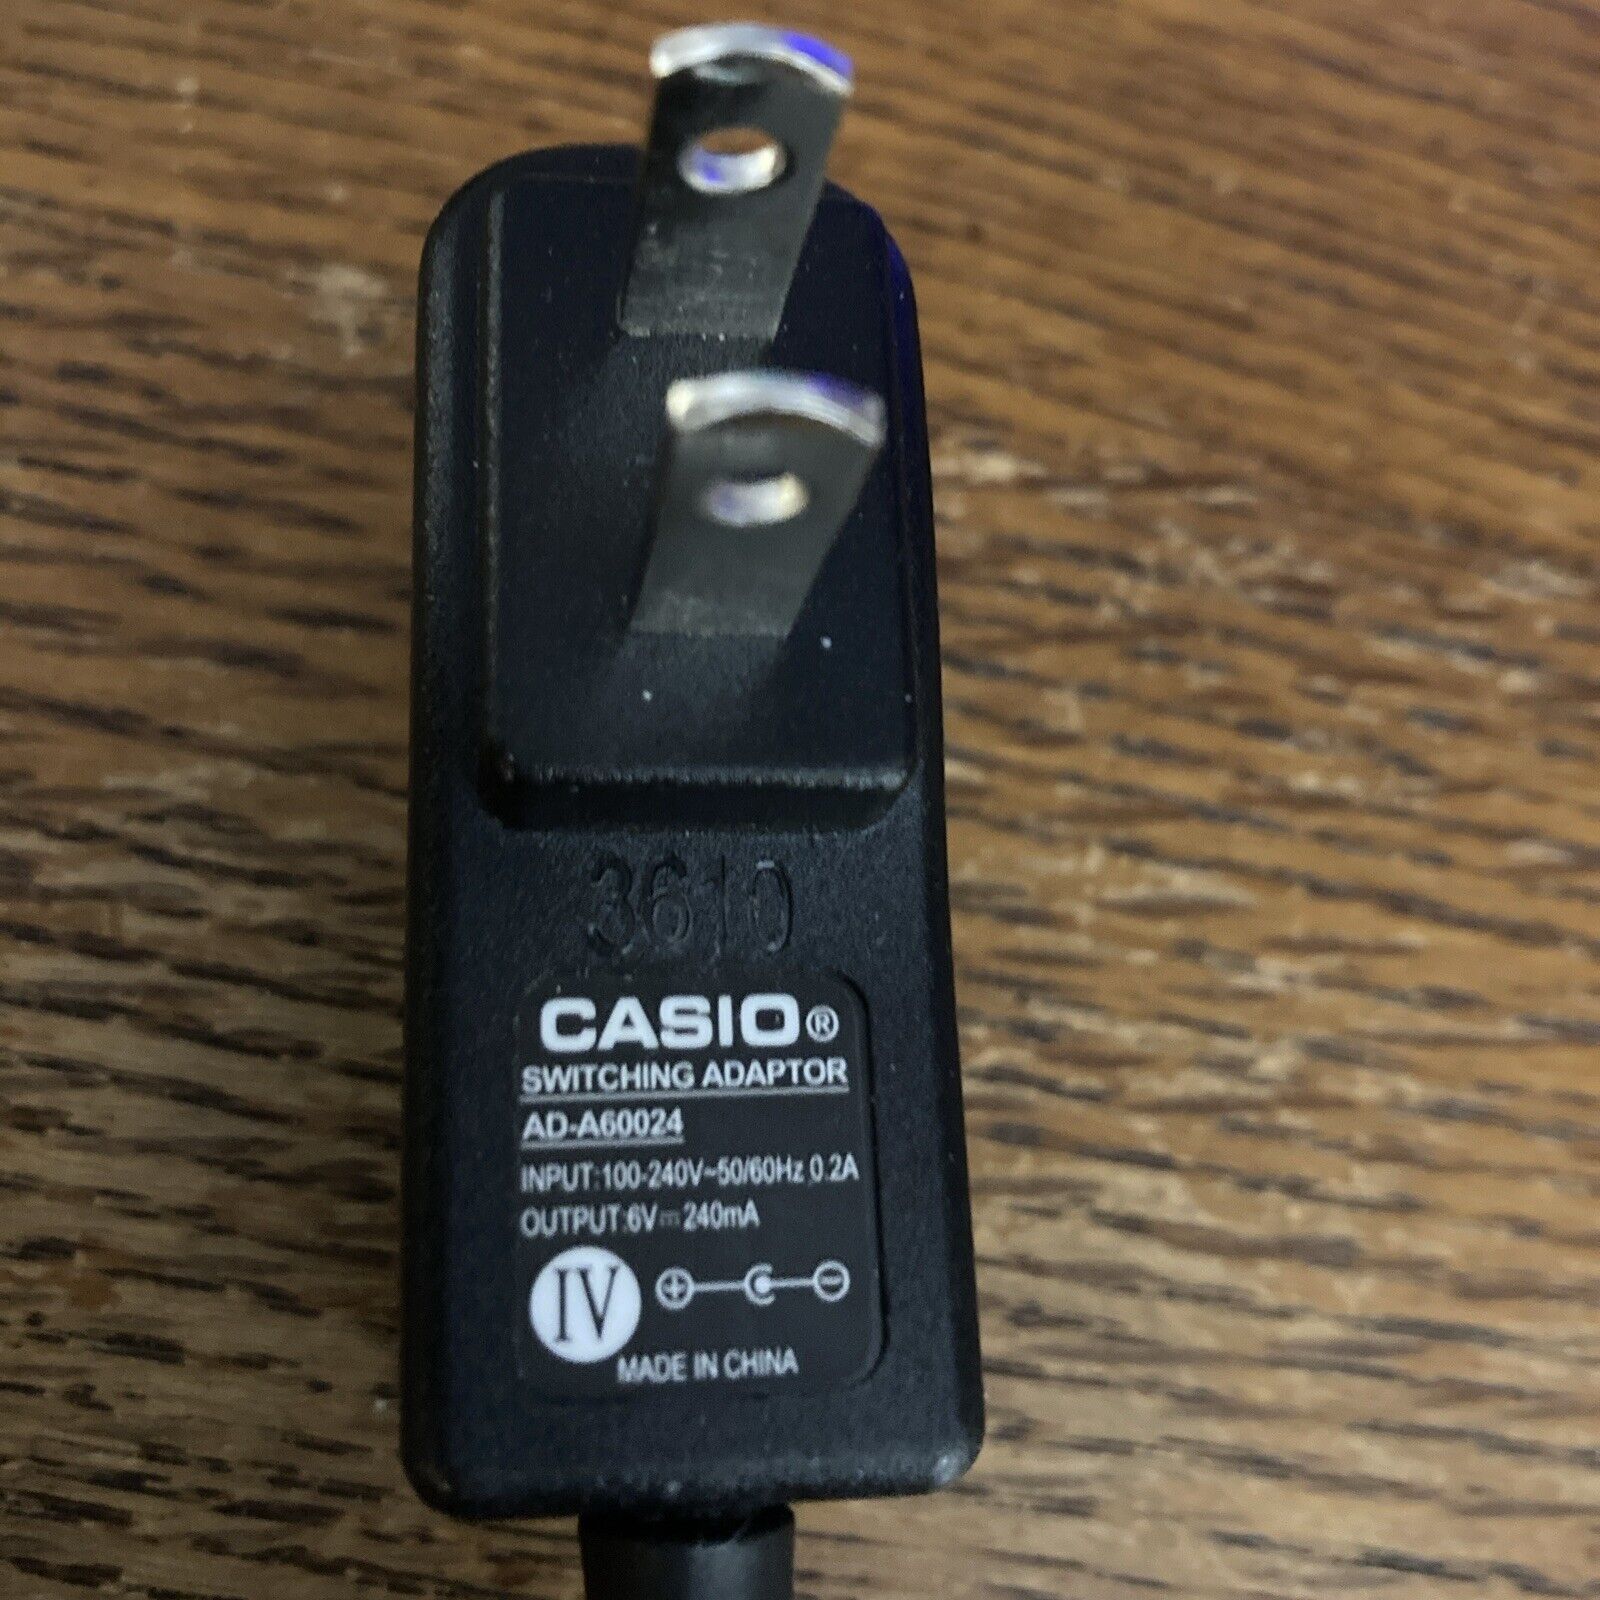 *Brand NEW*Genuine CASIO Switching Adapter - Model AD-A60024 - Output 6V 240mA AC ADAPTER Power Supp - Click Image to Close